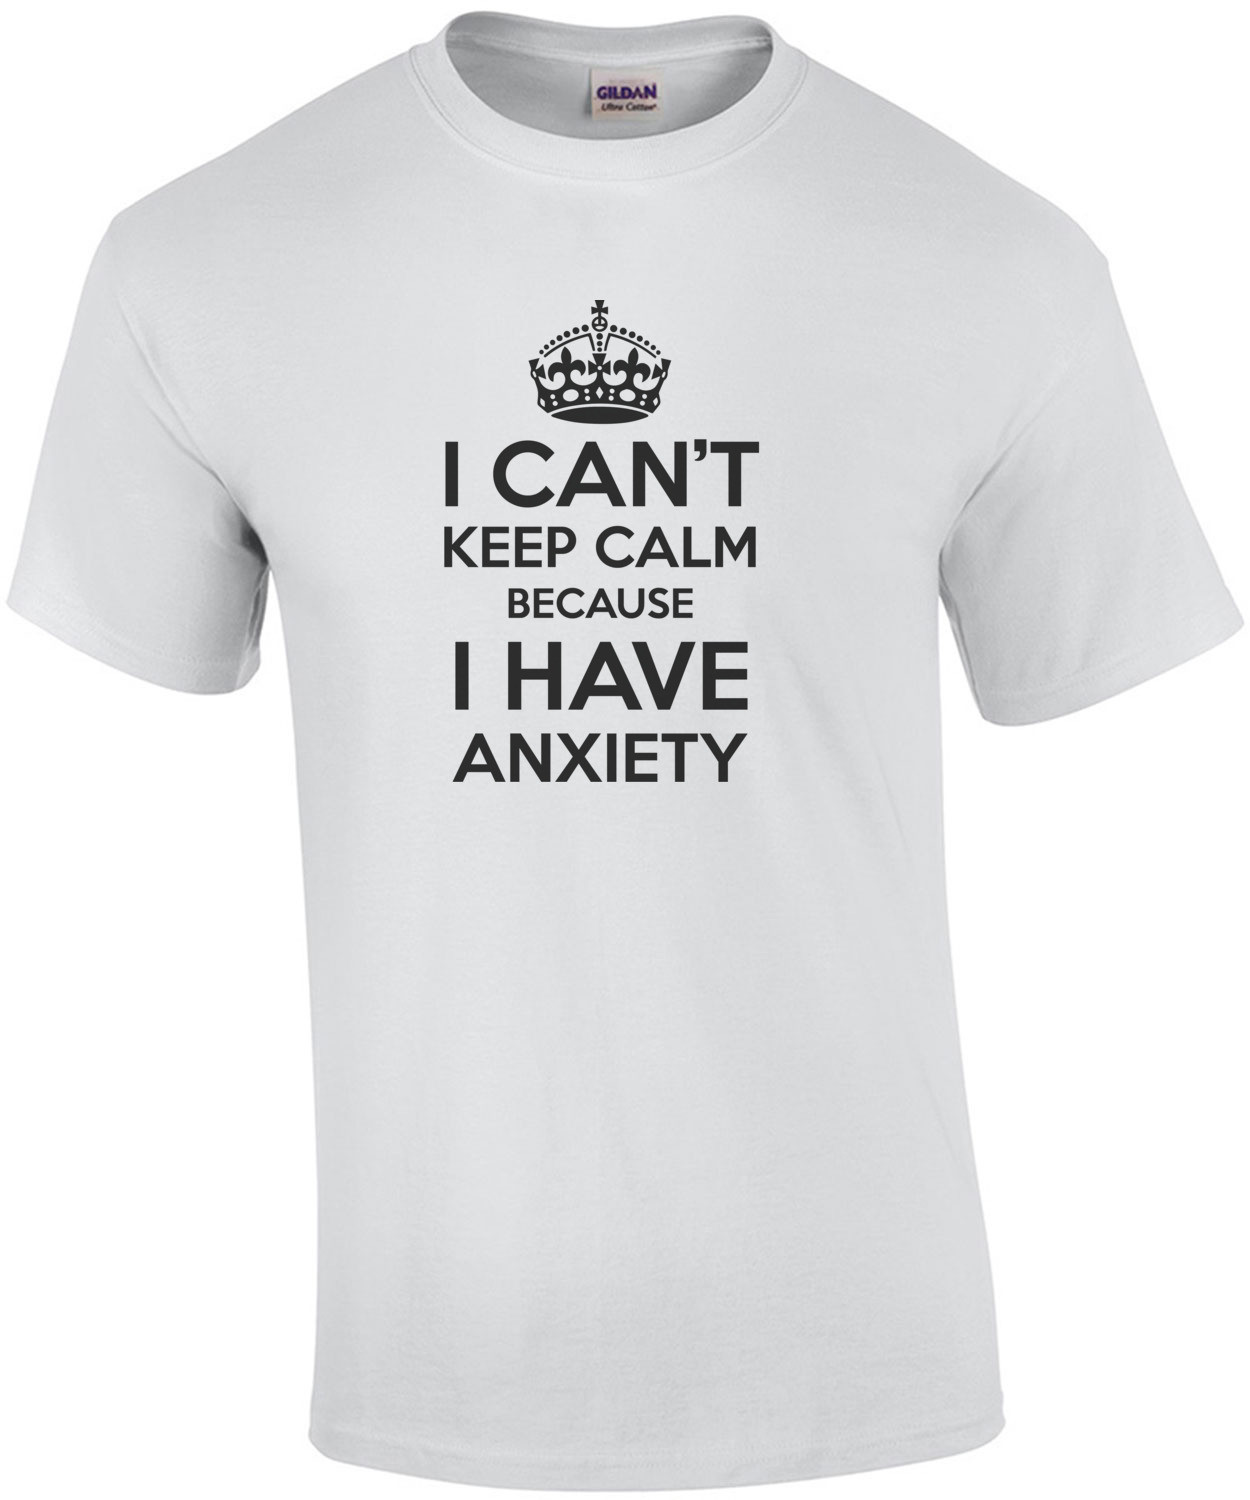 I can't keep calm because I have anxiety